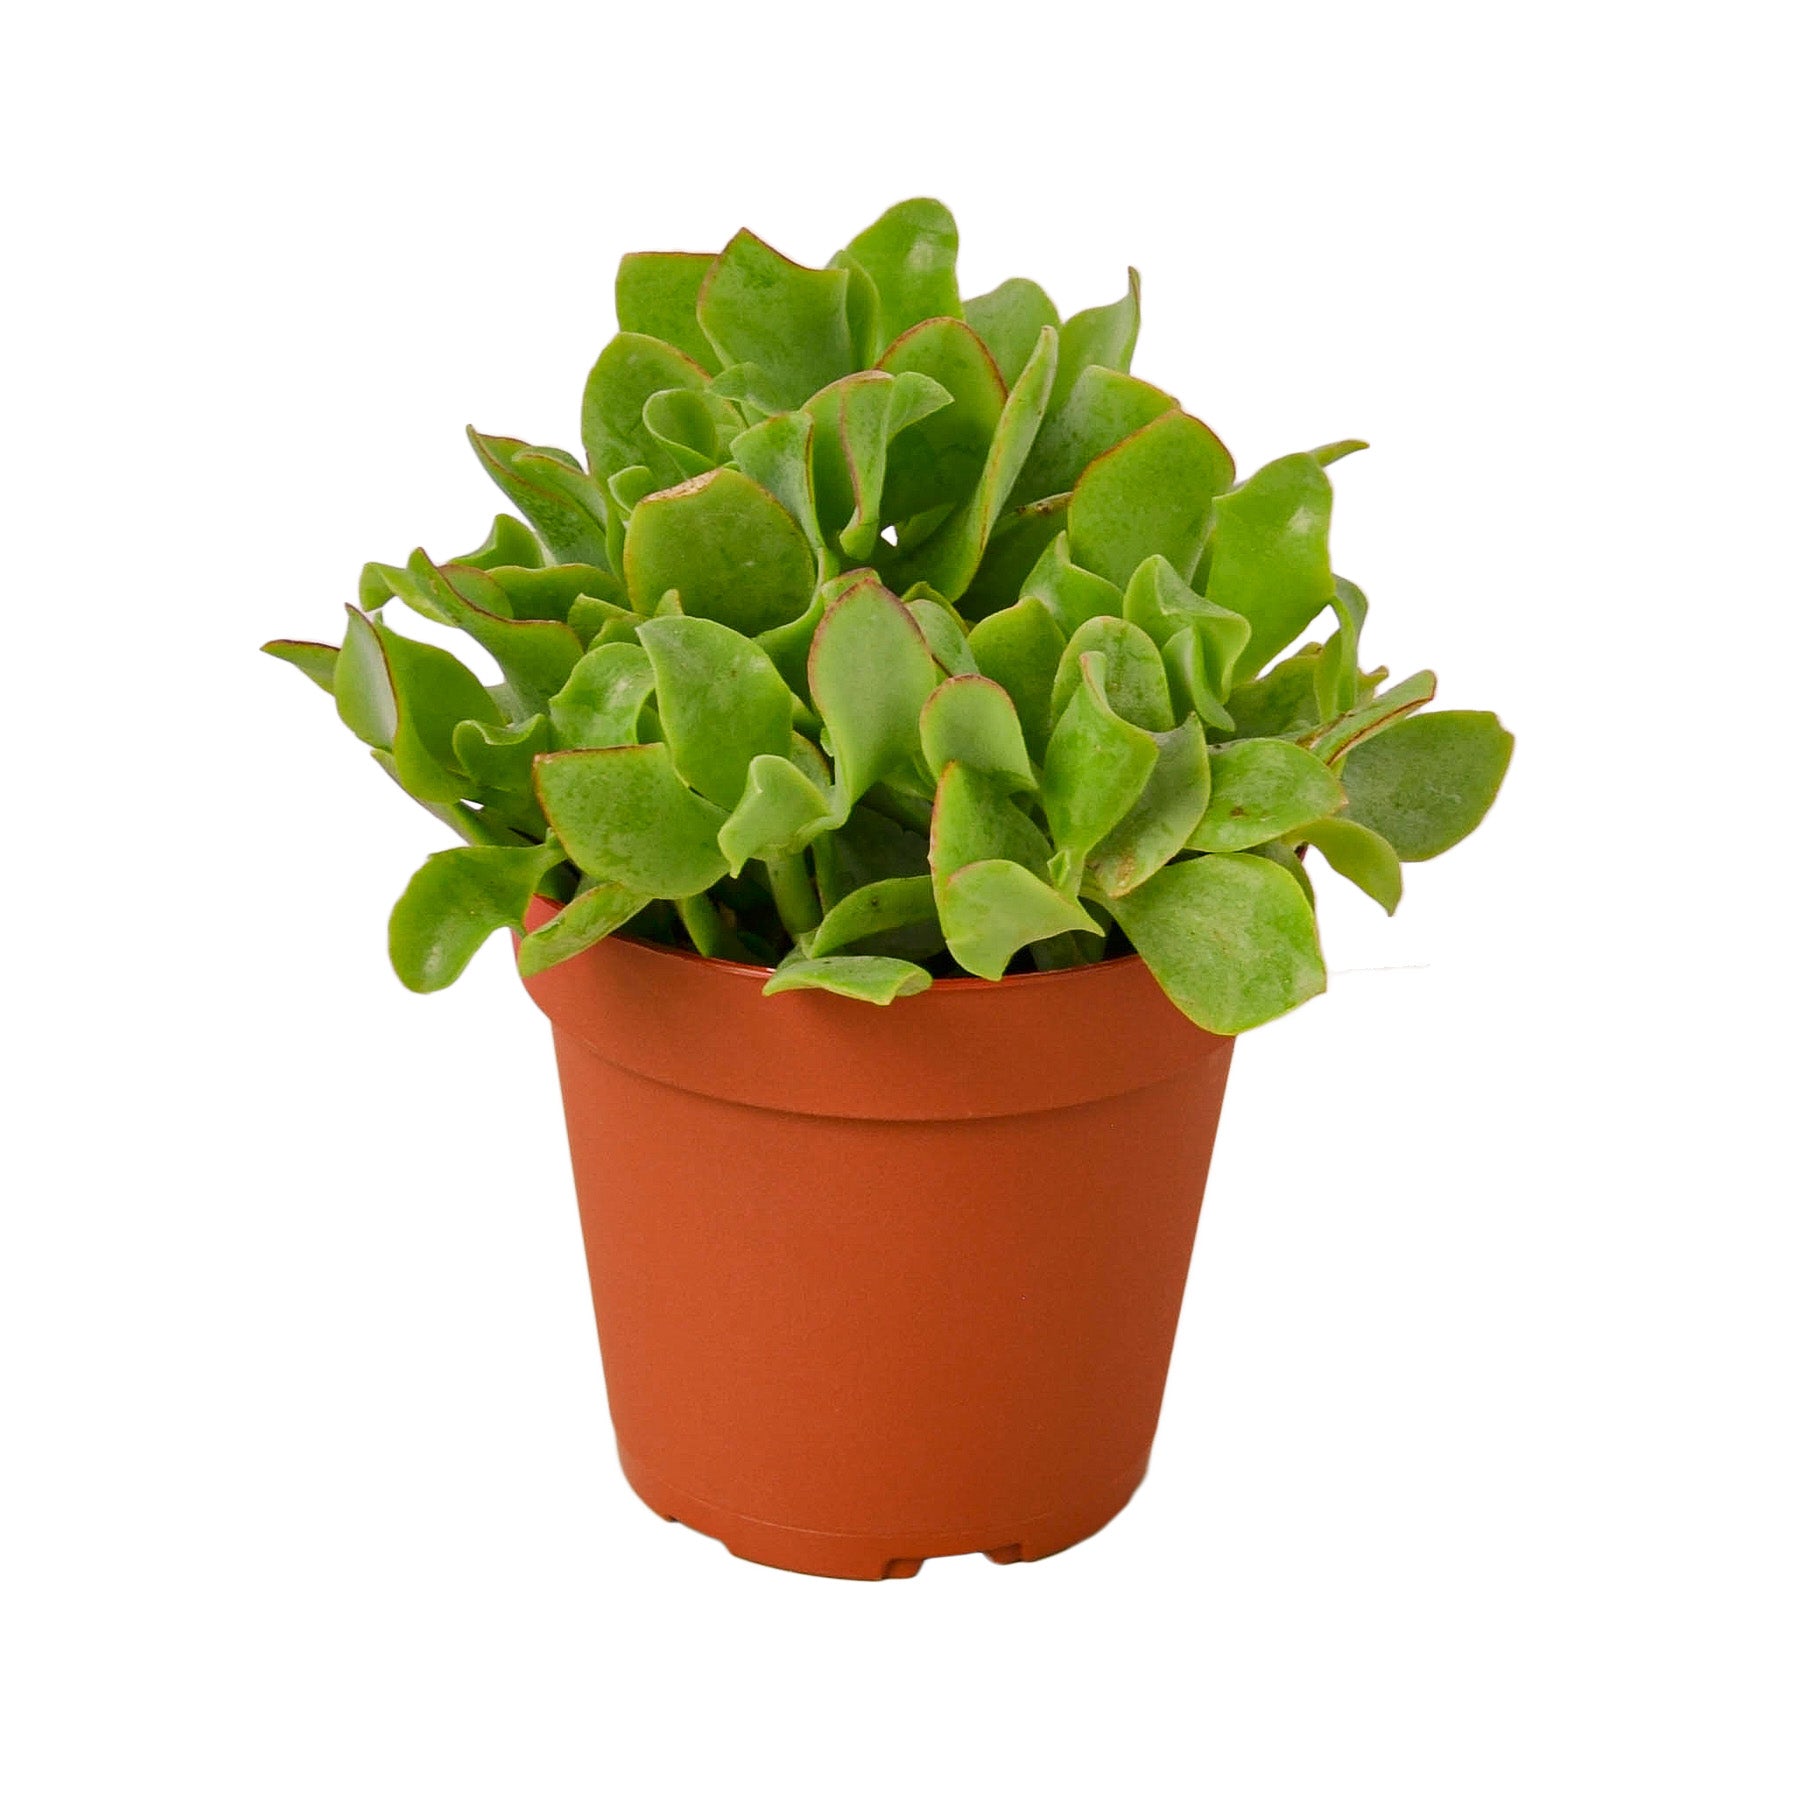 A small plant in a pot on a white background available at a nursery near me.